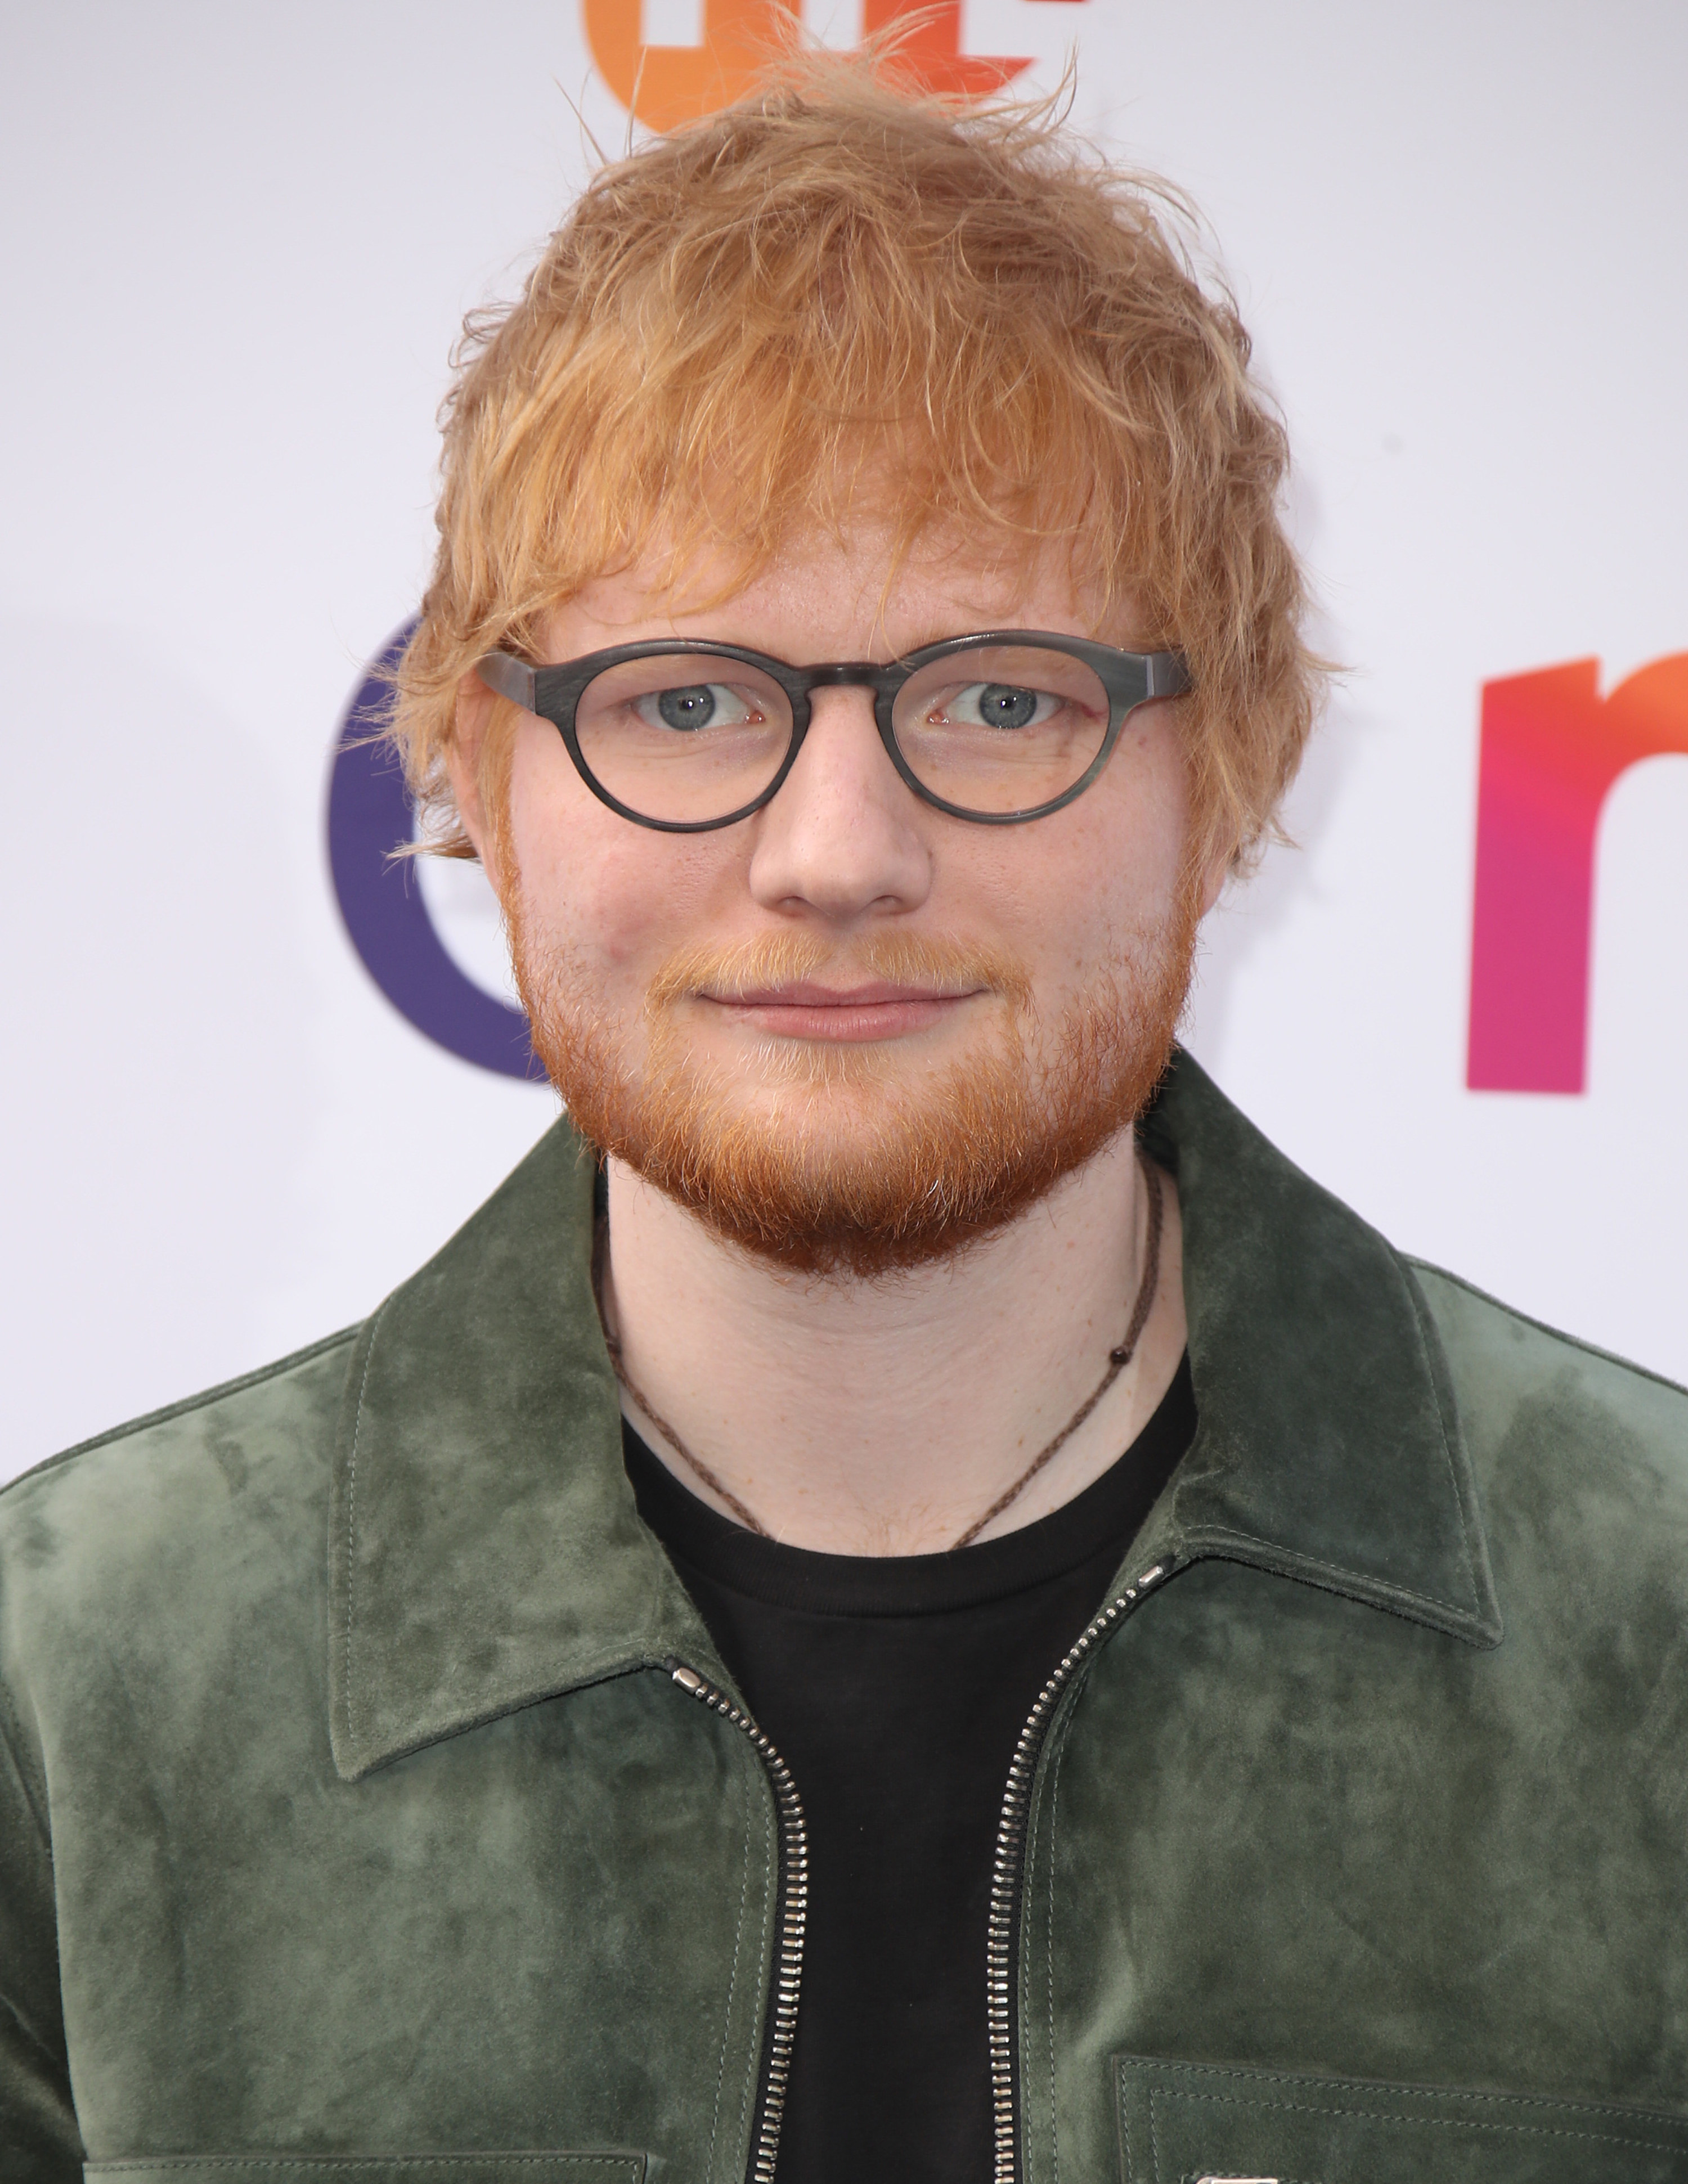 Ed Sheeran attends the Nordoff Robbins O2 Silver Clef Awards 2019 at Grosvenor House on July 05, 2019, in London, England